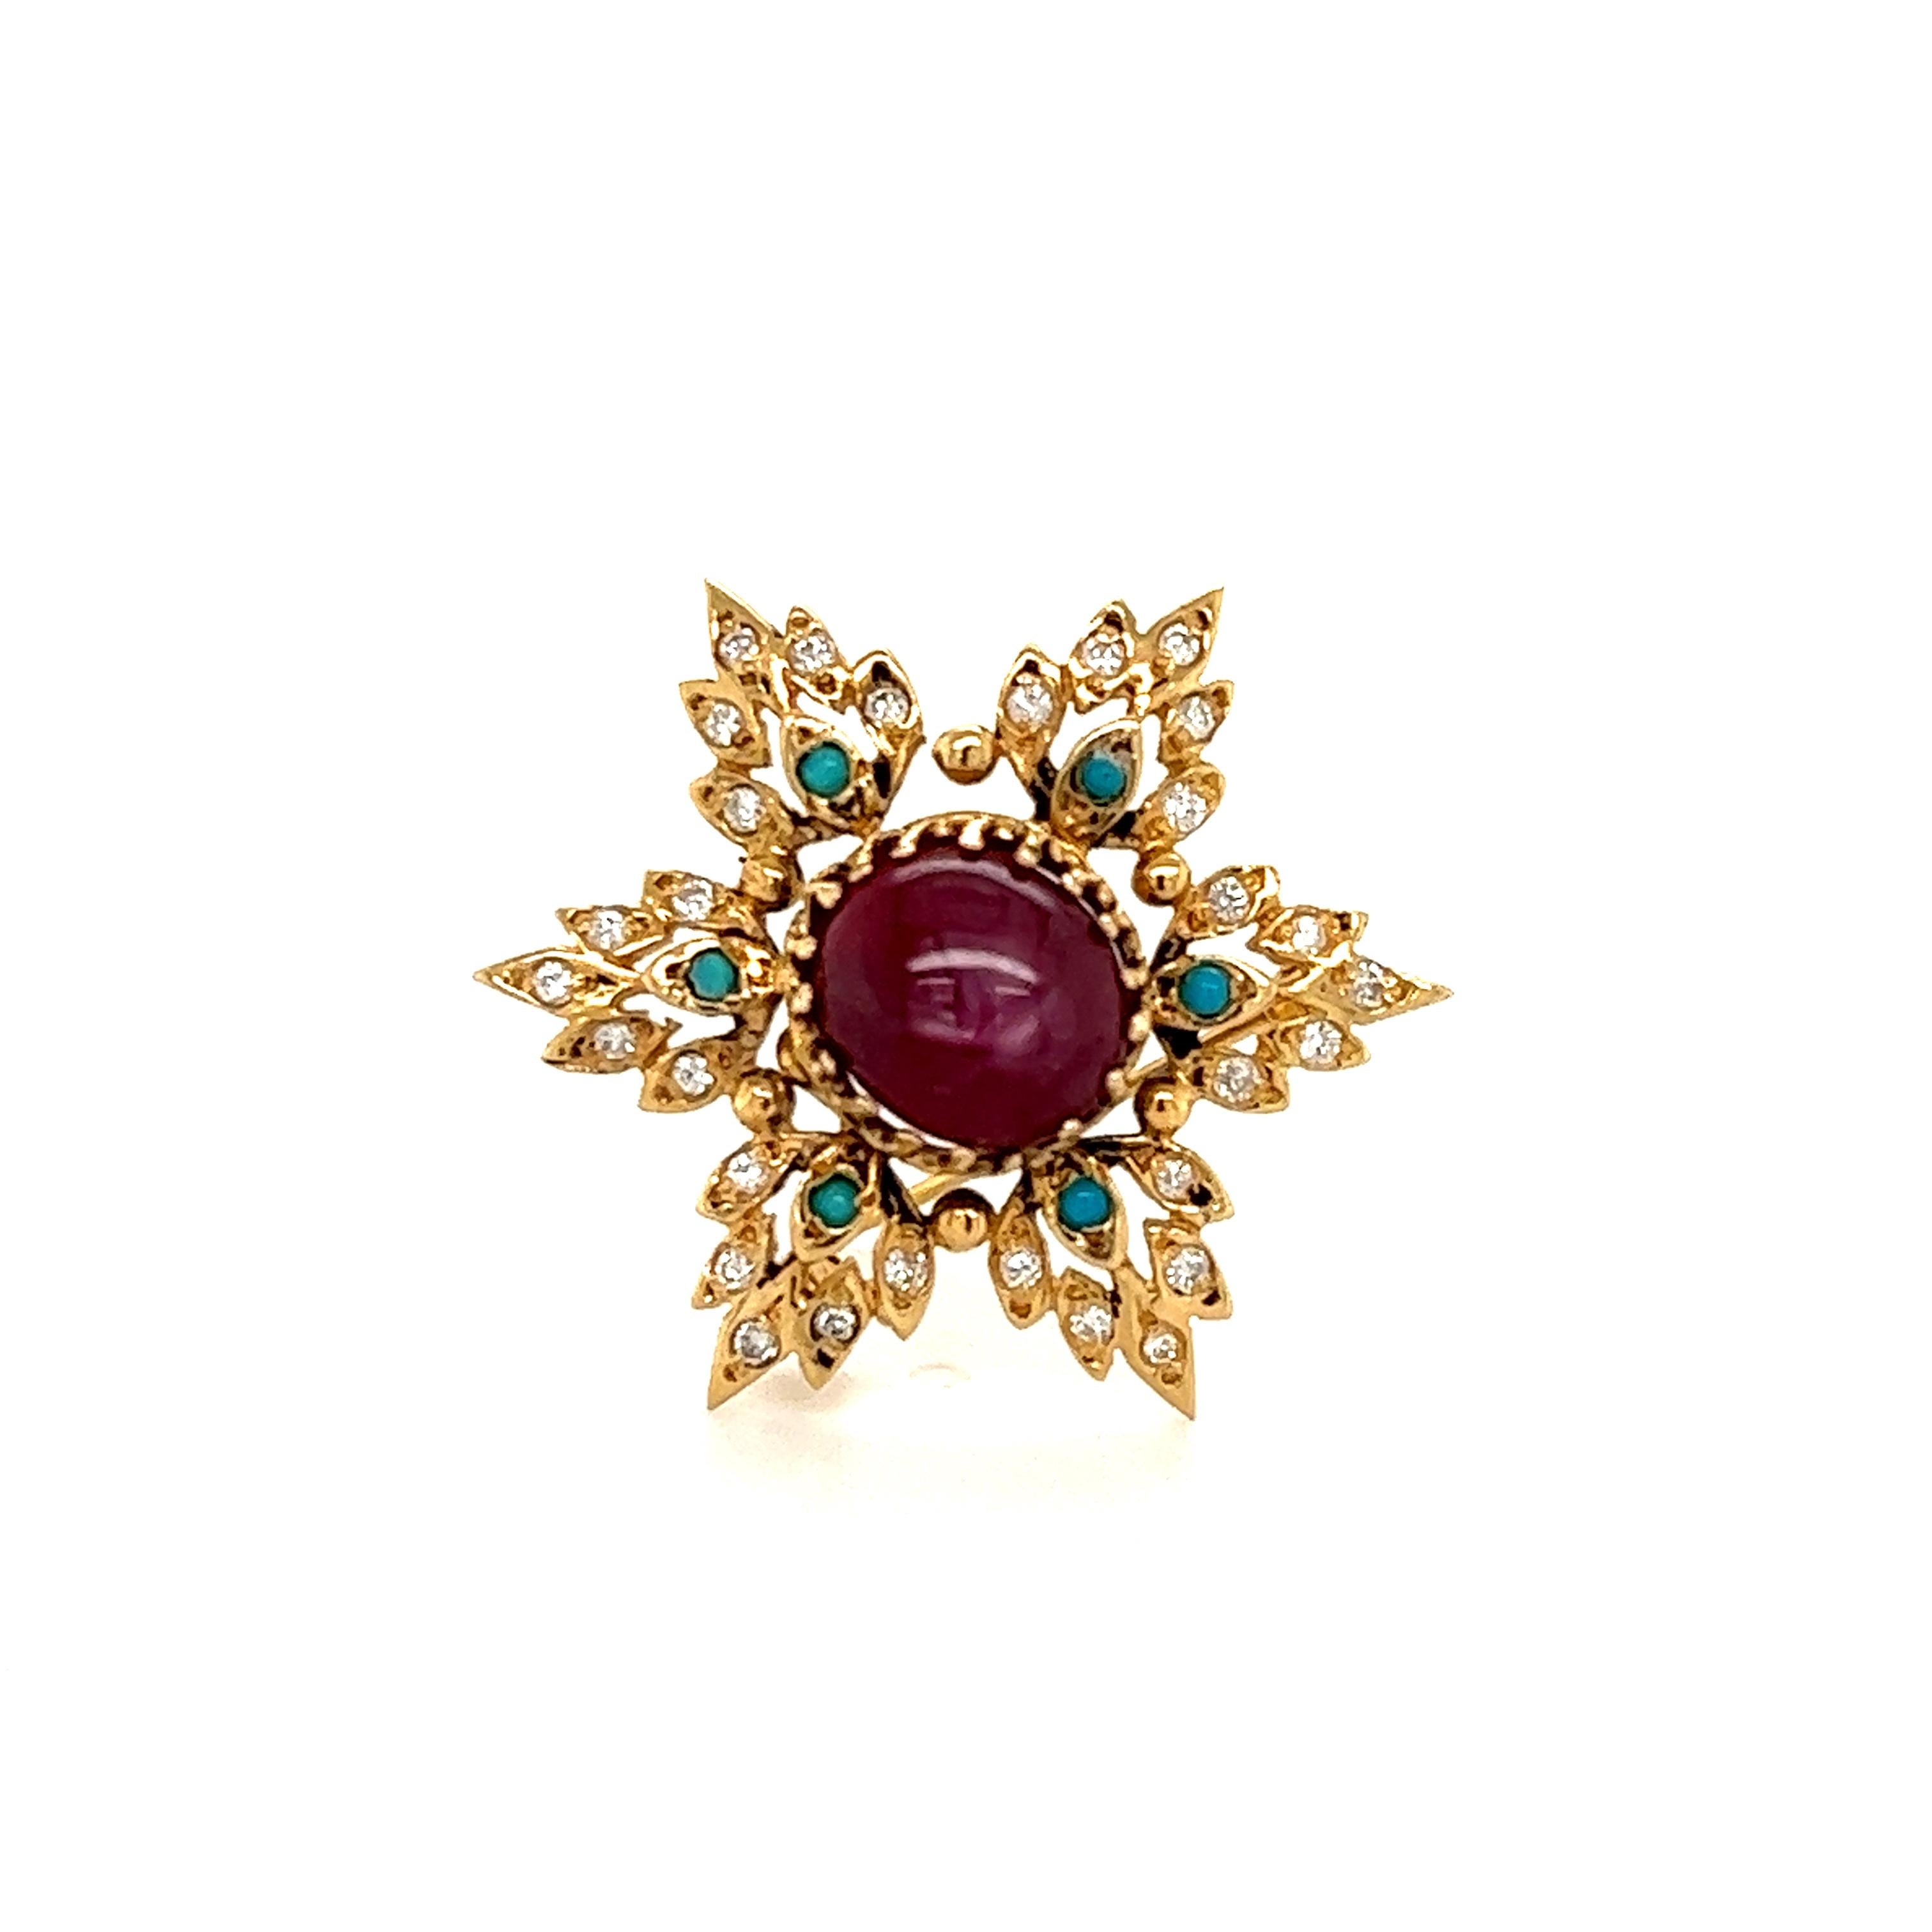 Beautiful snowflake brooch crafted in 14k yellow gold. The brooch highlights one star ruby gemstone showing a deep red color and natural growth patterns with electric asterism. Ornate detail is seen throughout as turquoise gemstones accent the